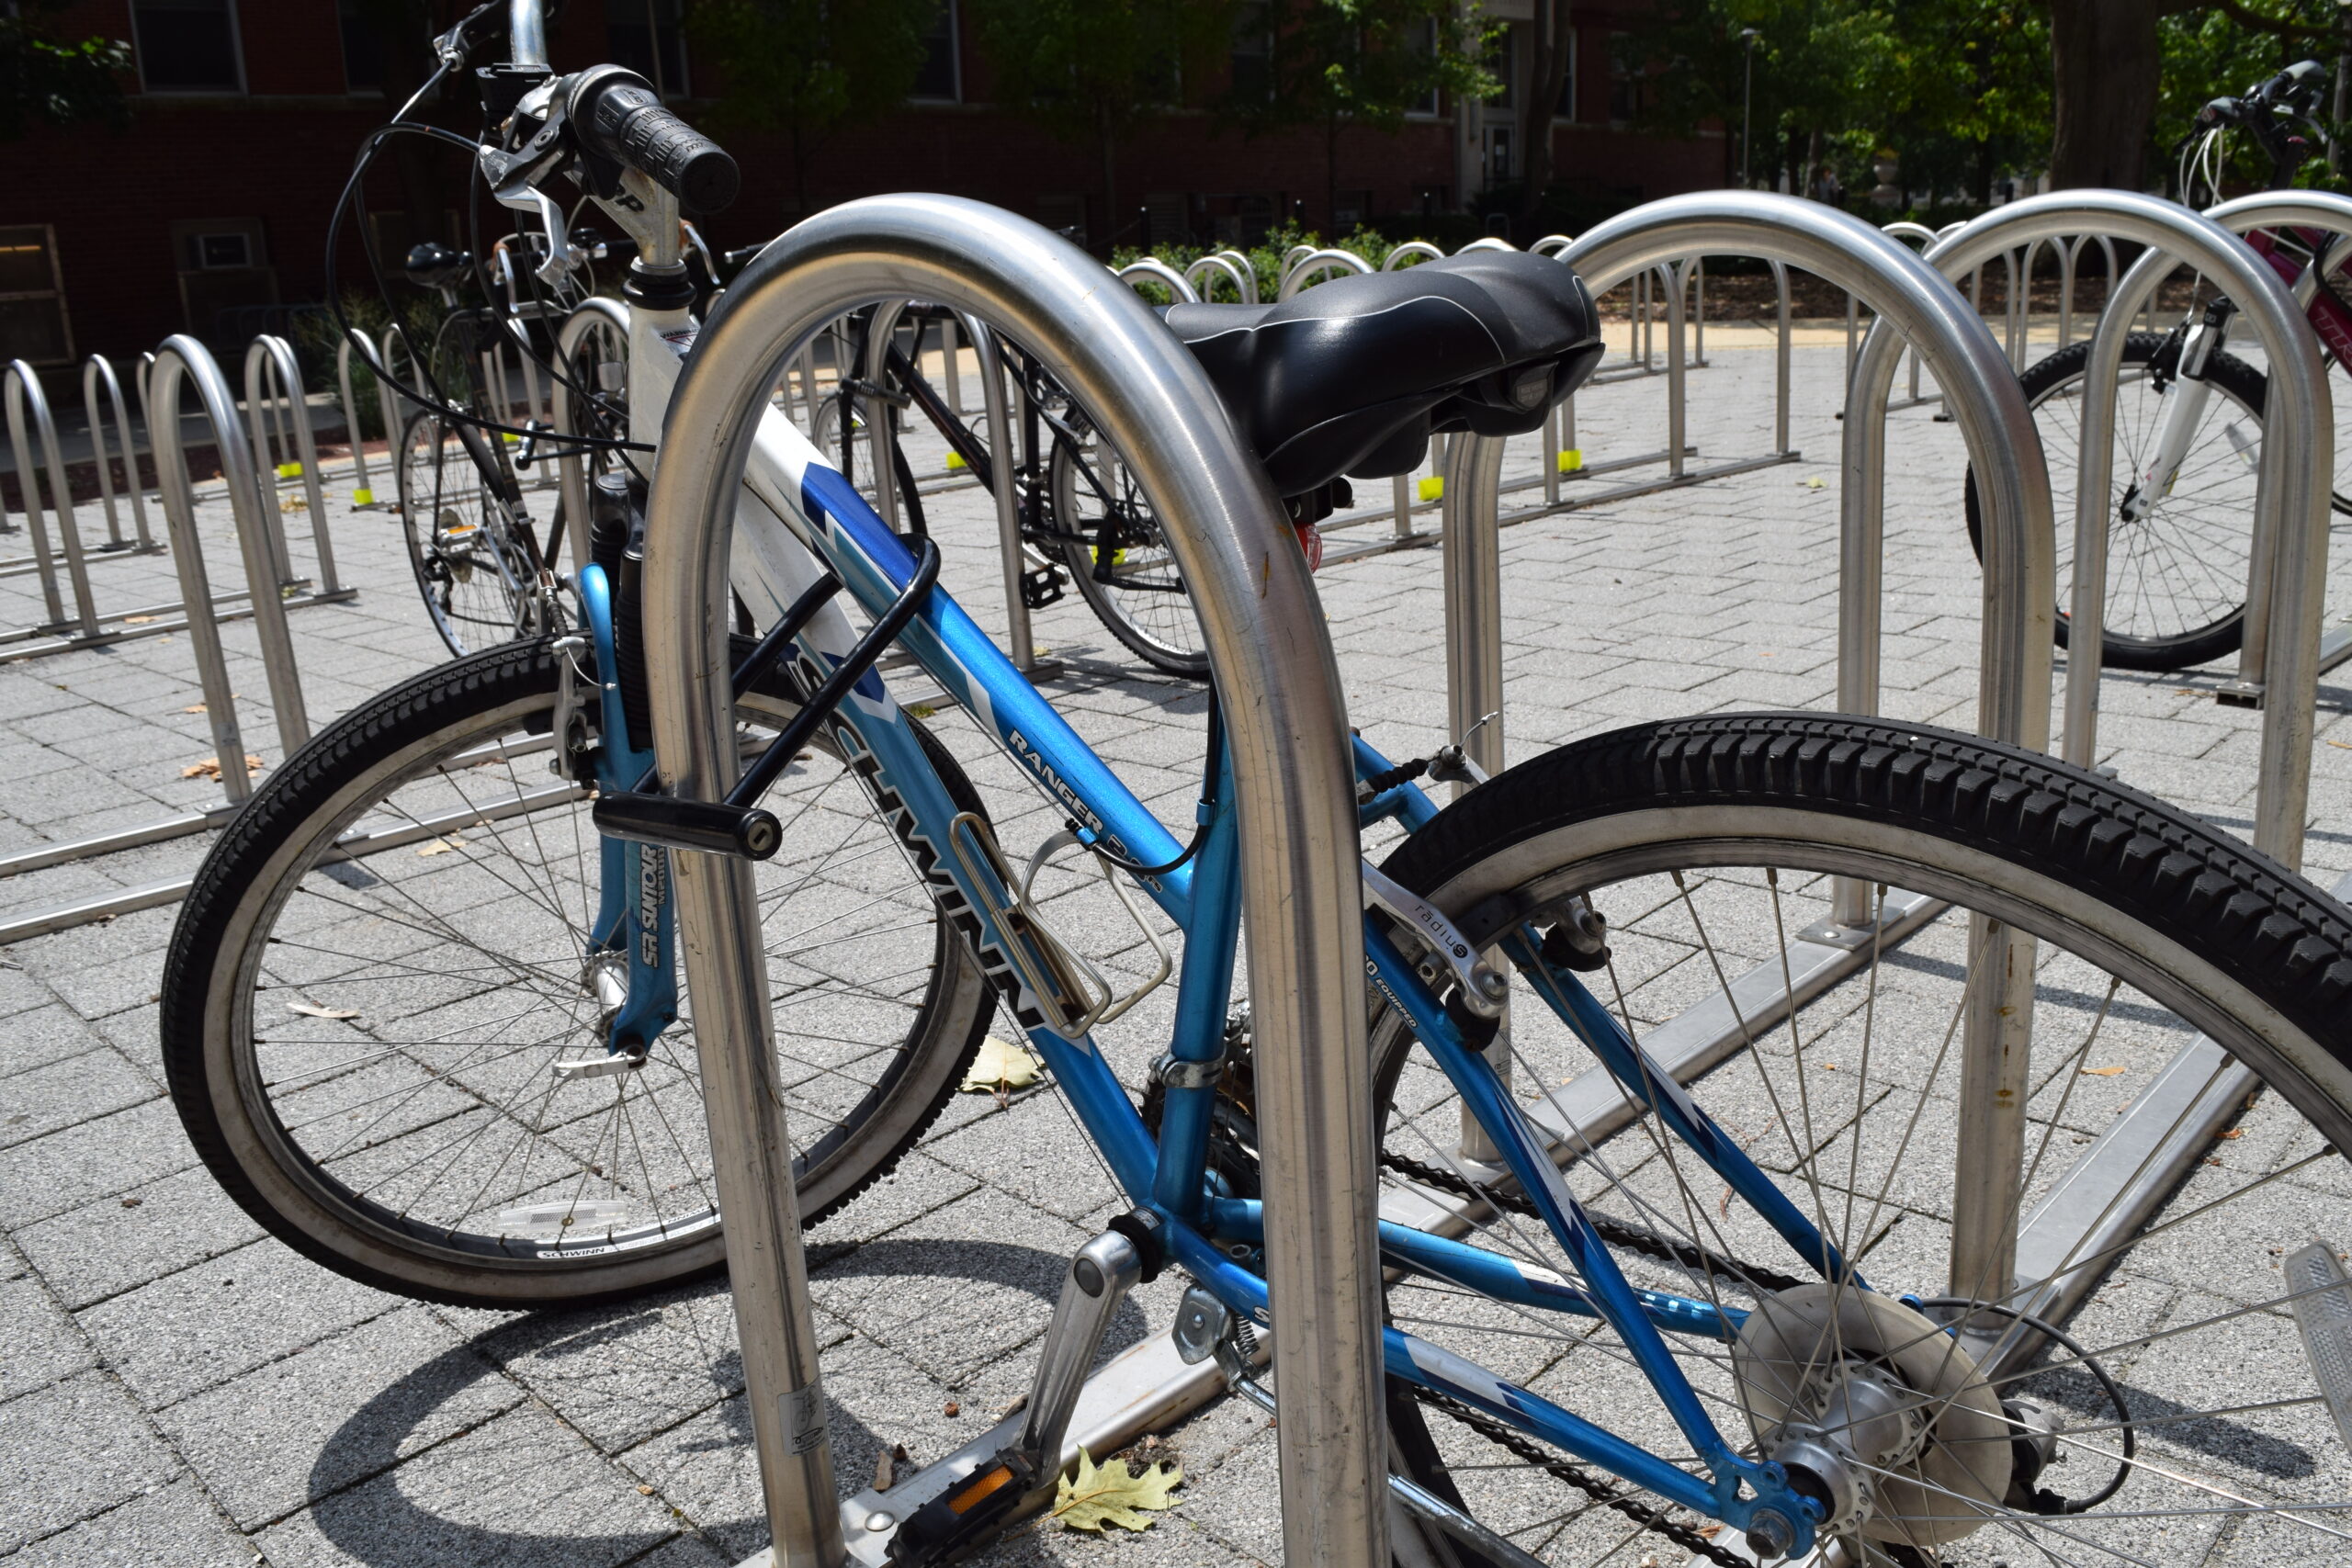 A blue bicycle leaning against a metal bicycle rack locked with a U-lock.